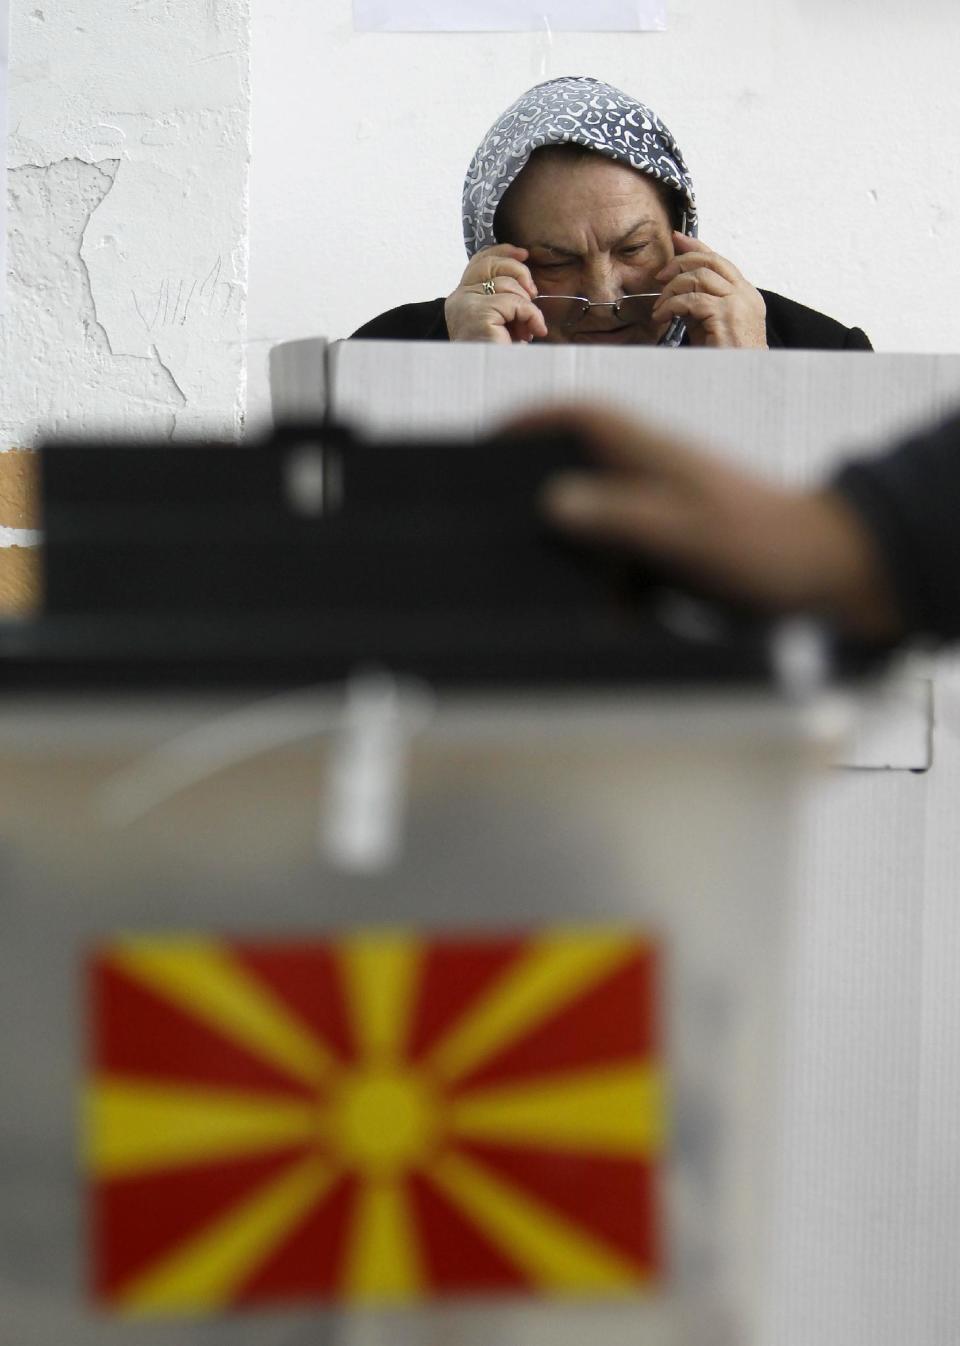 A woman puts on her glasses before voting at a polling station in village of Tearce, in northwestern Macedonia, on Sunday, Dec. 25, 2016. Authorities in Macedonia have ordered a Christmas Day rerun of a parliamentary election in one voting district - a decision that could threaten the slim majority of the long-governing conservatives. (AP Photo/Boris Grdanoski)